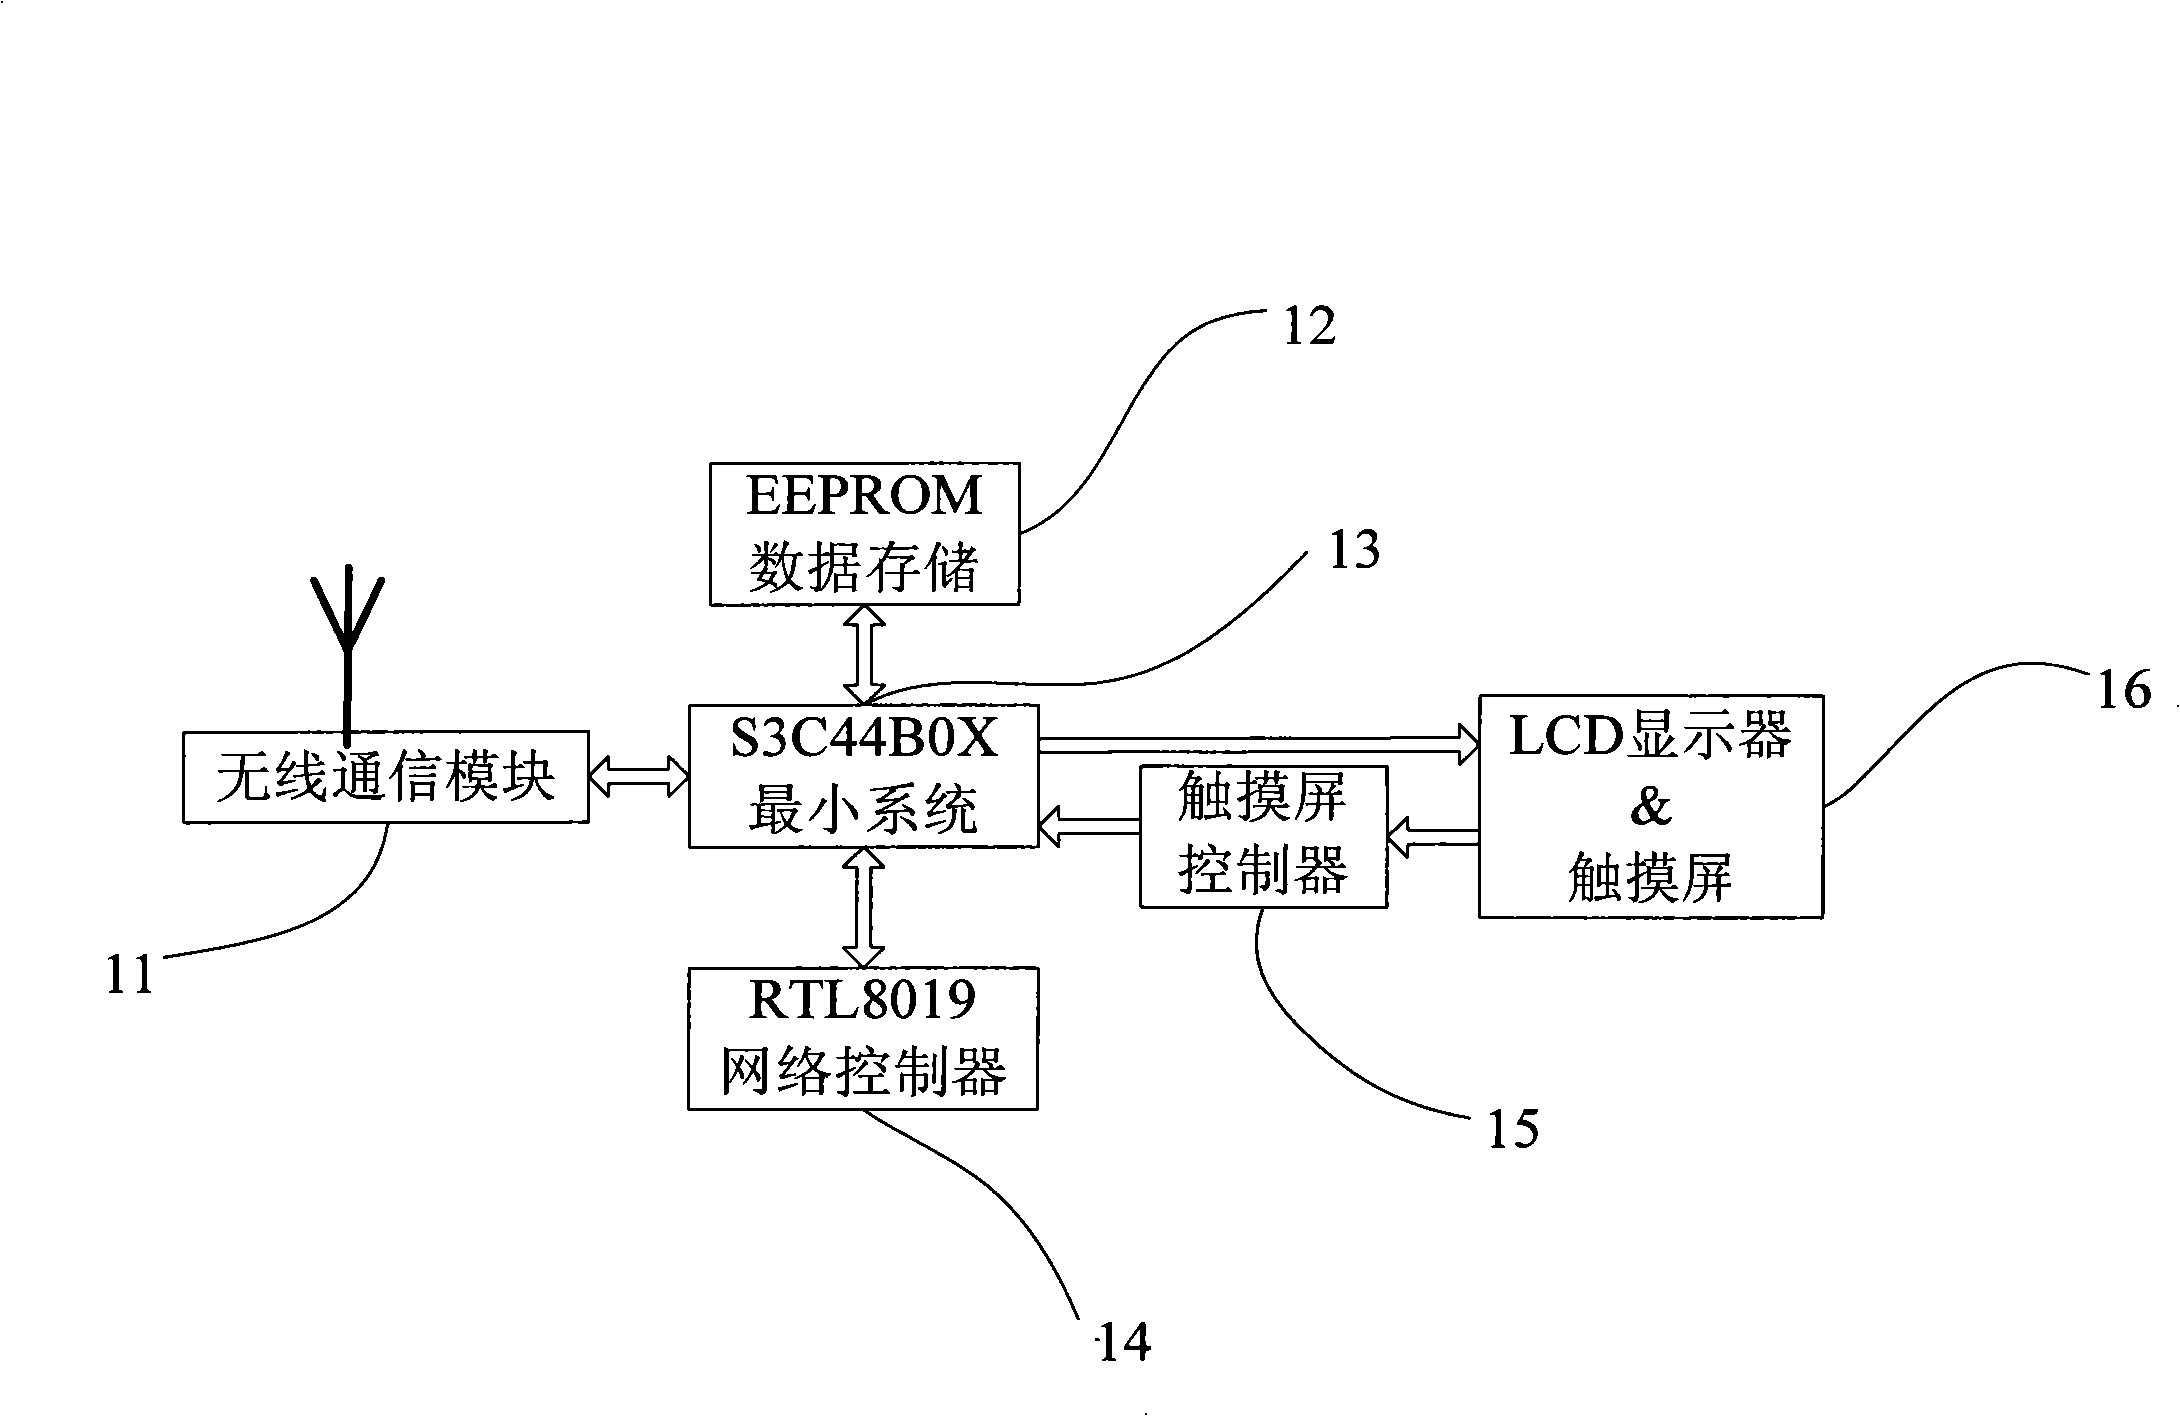 Soil water content monitoring instrument based on embedded system